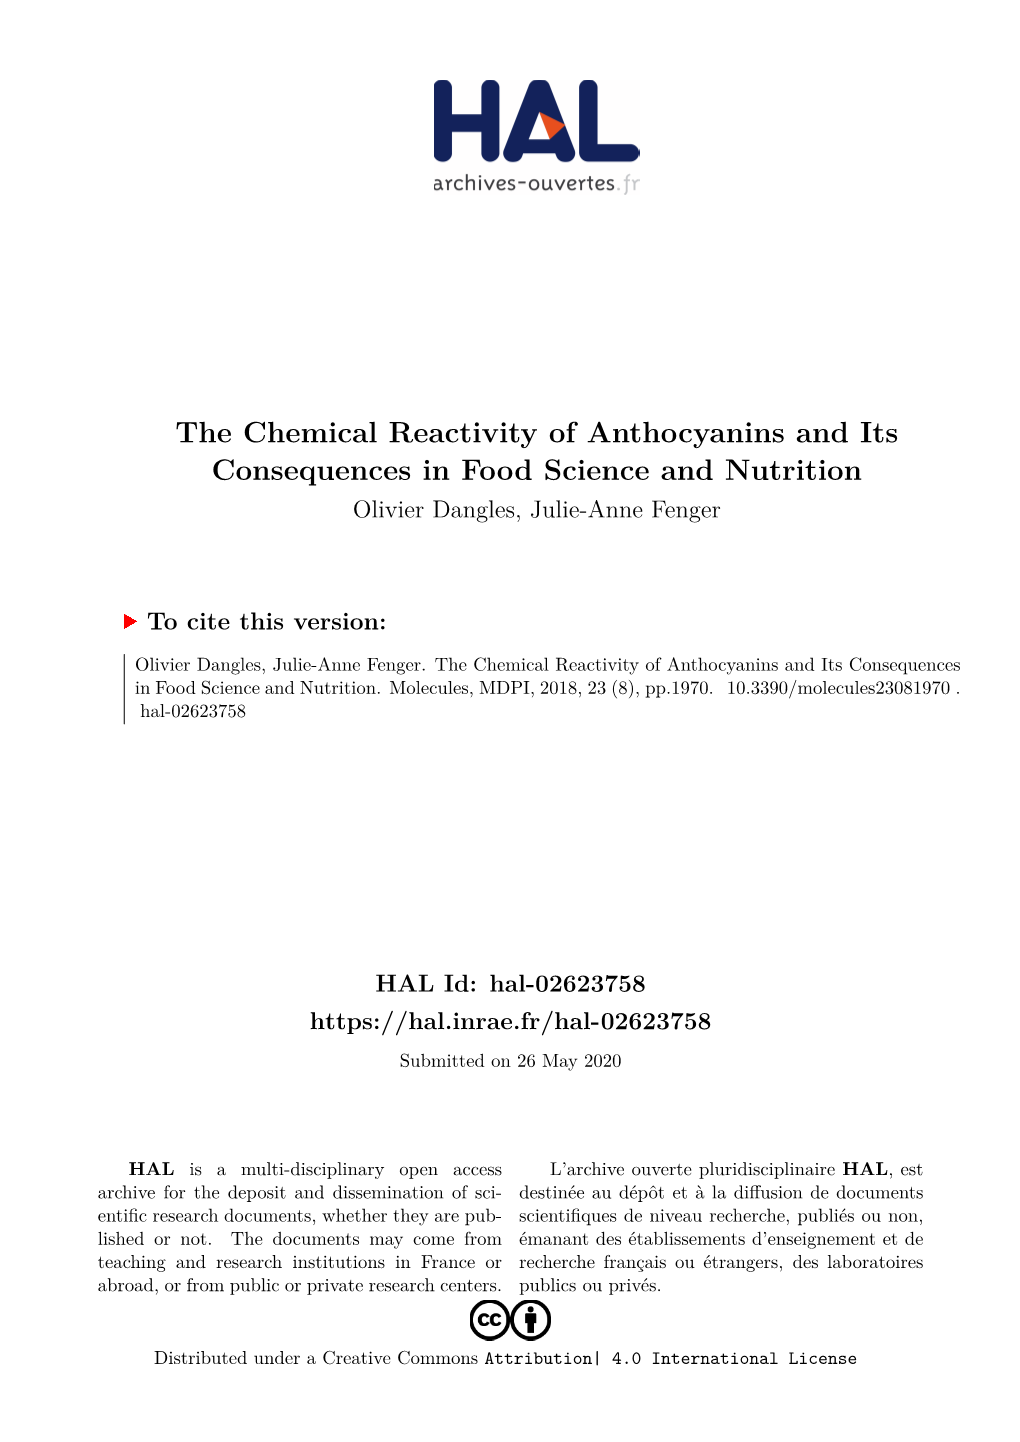 The Chemical Reactivity of Anthocyanins and Its Consequences in Food Science and Nutrition Olivier Dangles, Julie-Anne Fenger